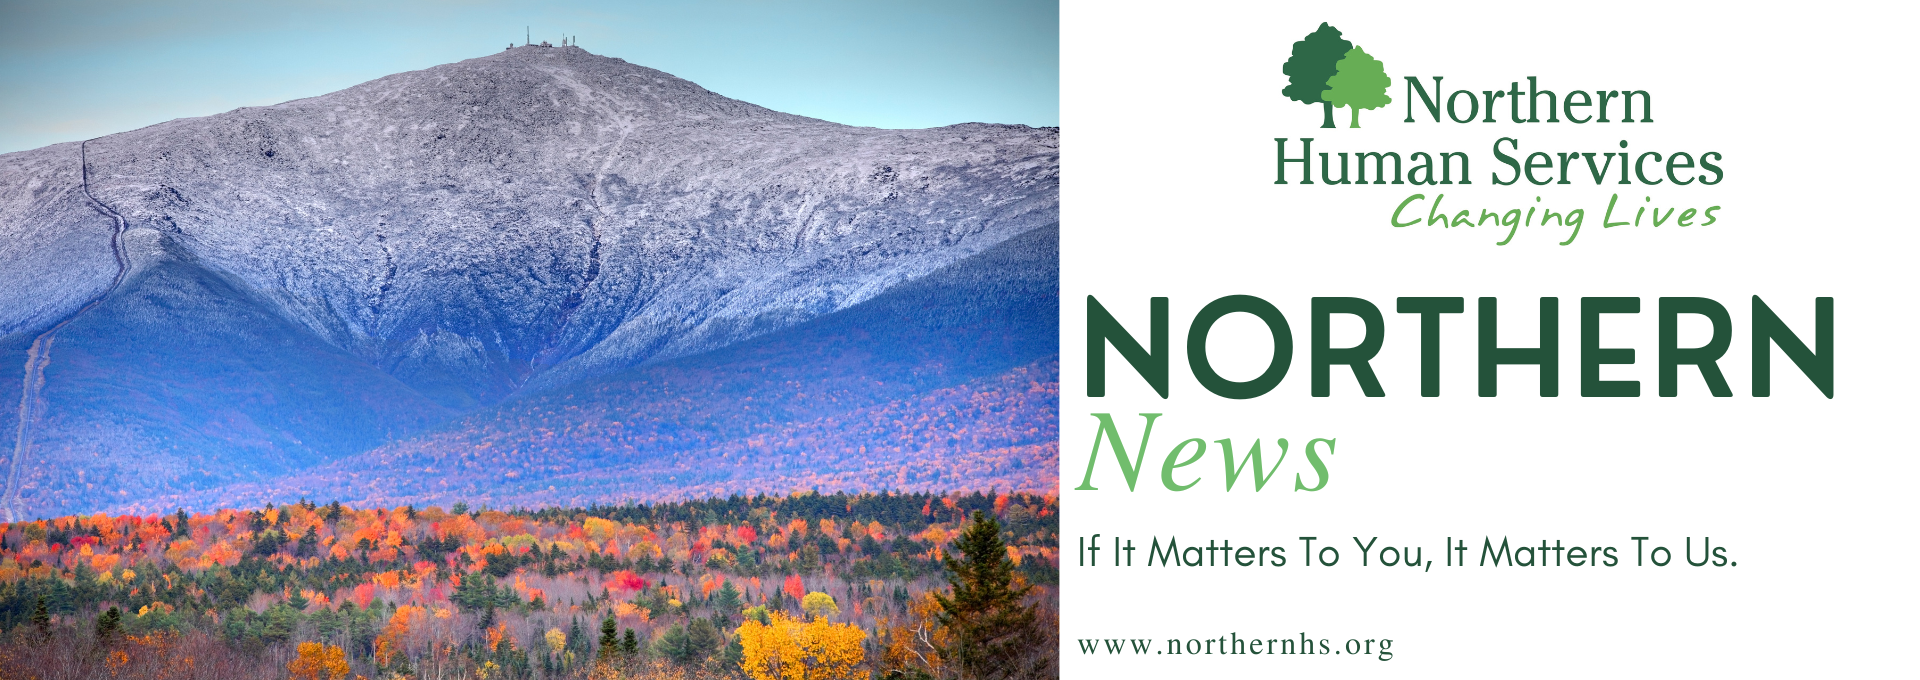 Mount Washington in fall snow-capped with fall foliage below with the words Northern Human Services logo of two trees and the words changing lives followed by Norther News, if it matters to you, it matters to us, www.northernhs.org.